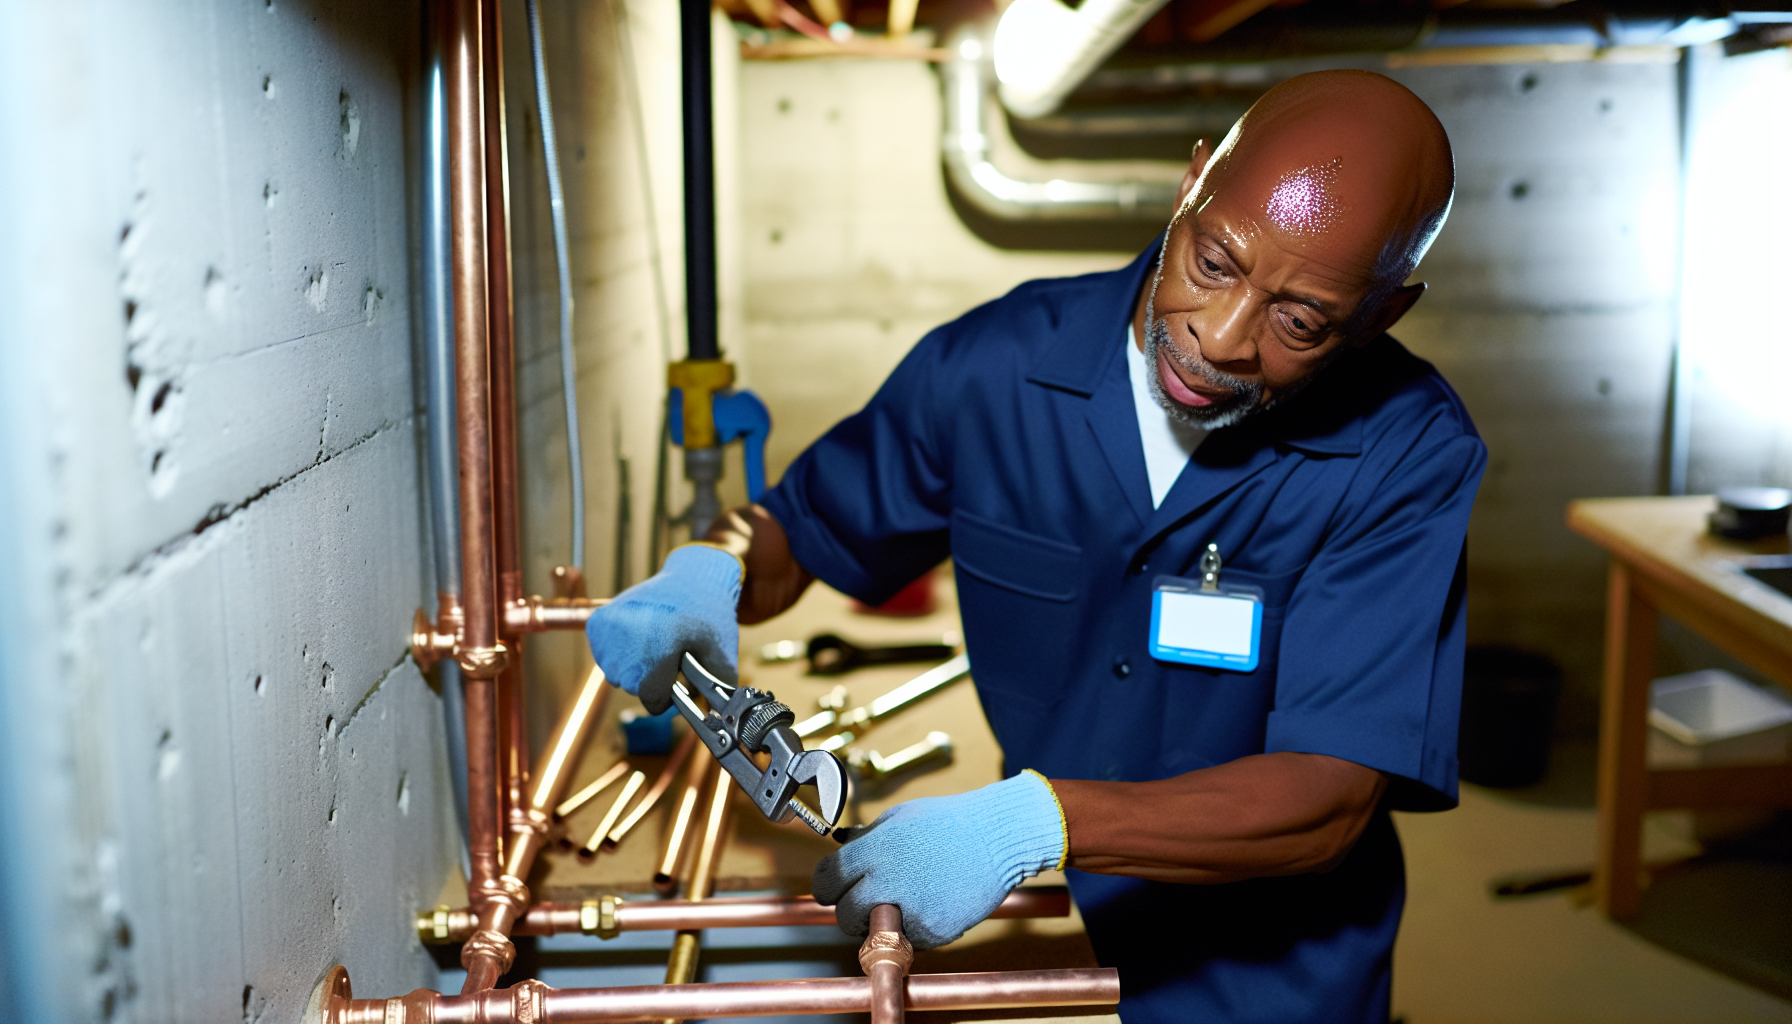 Photo of a licensed plumber working on pipes